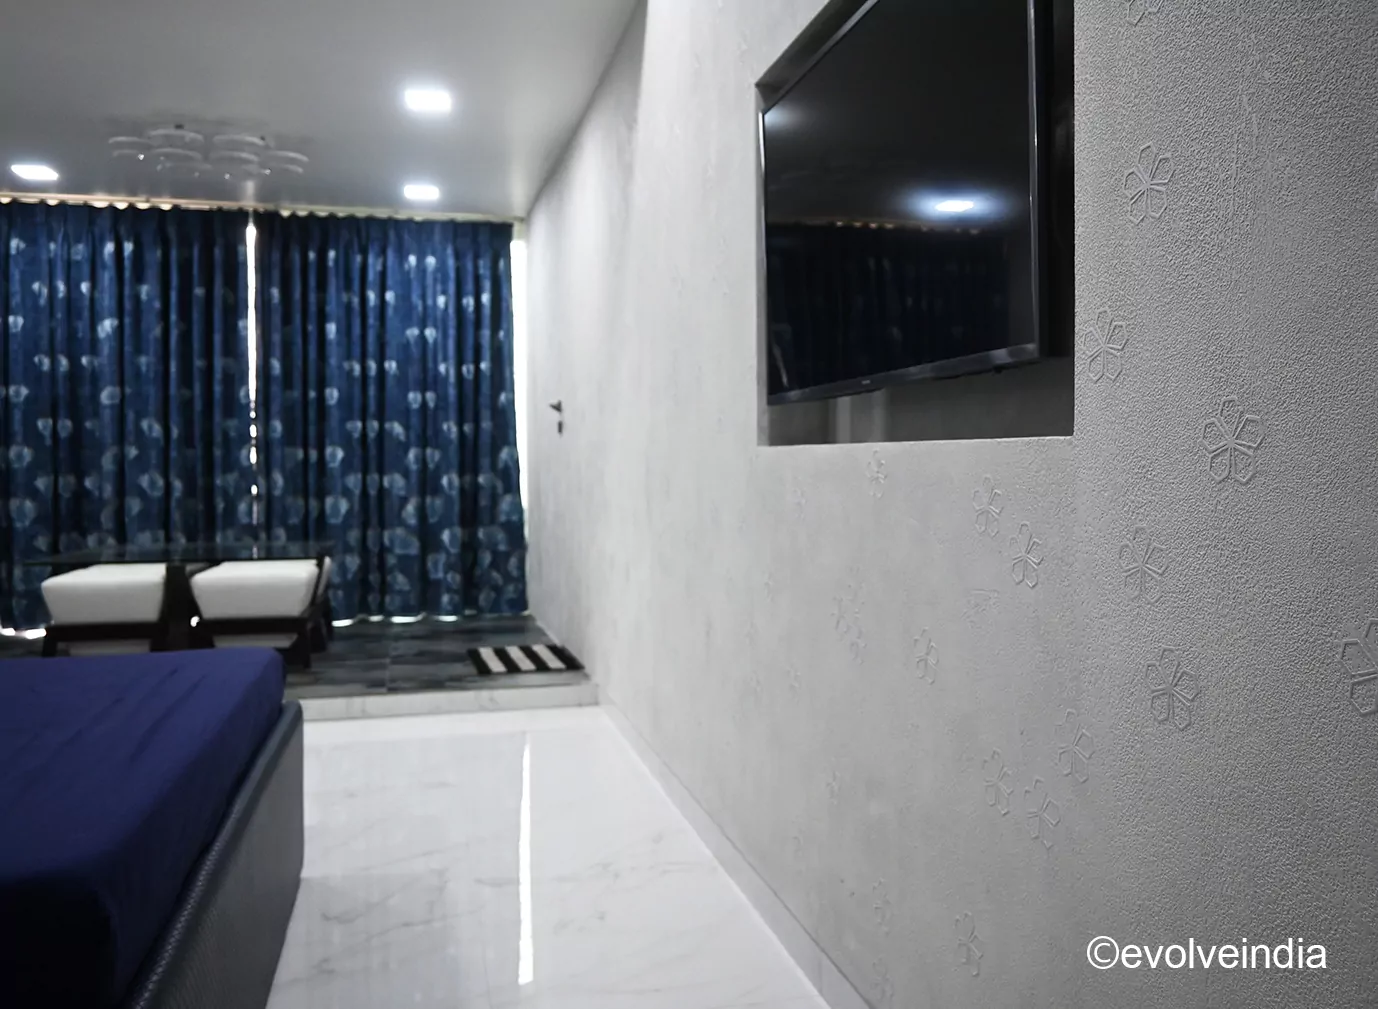 Seamless wall designed using aquilone decorative concrete finish by Evolve India